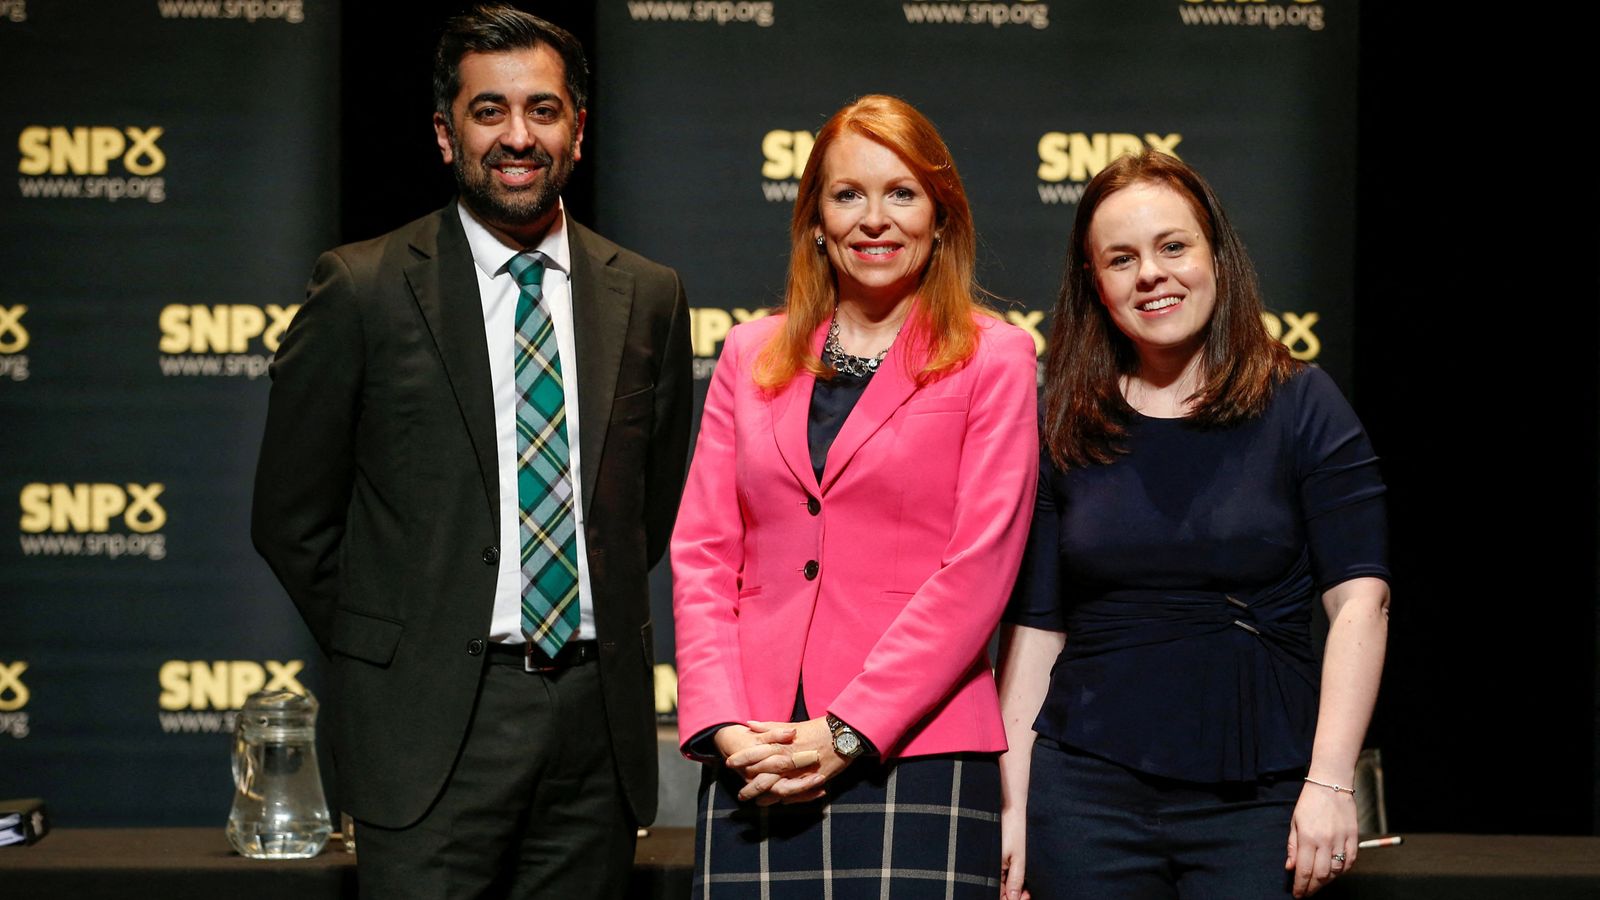 SNP leadership candidates pile pressure on the party over lack of transparency in ballot